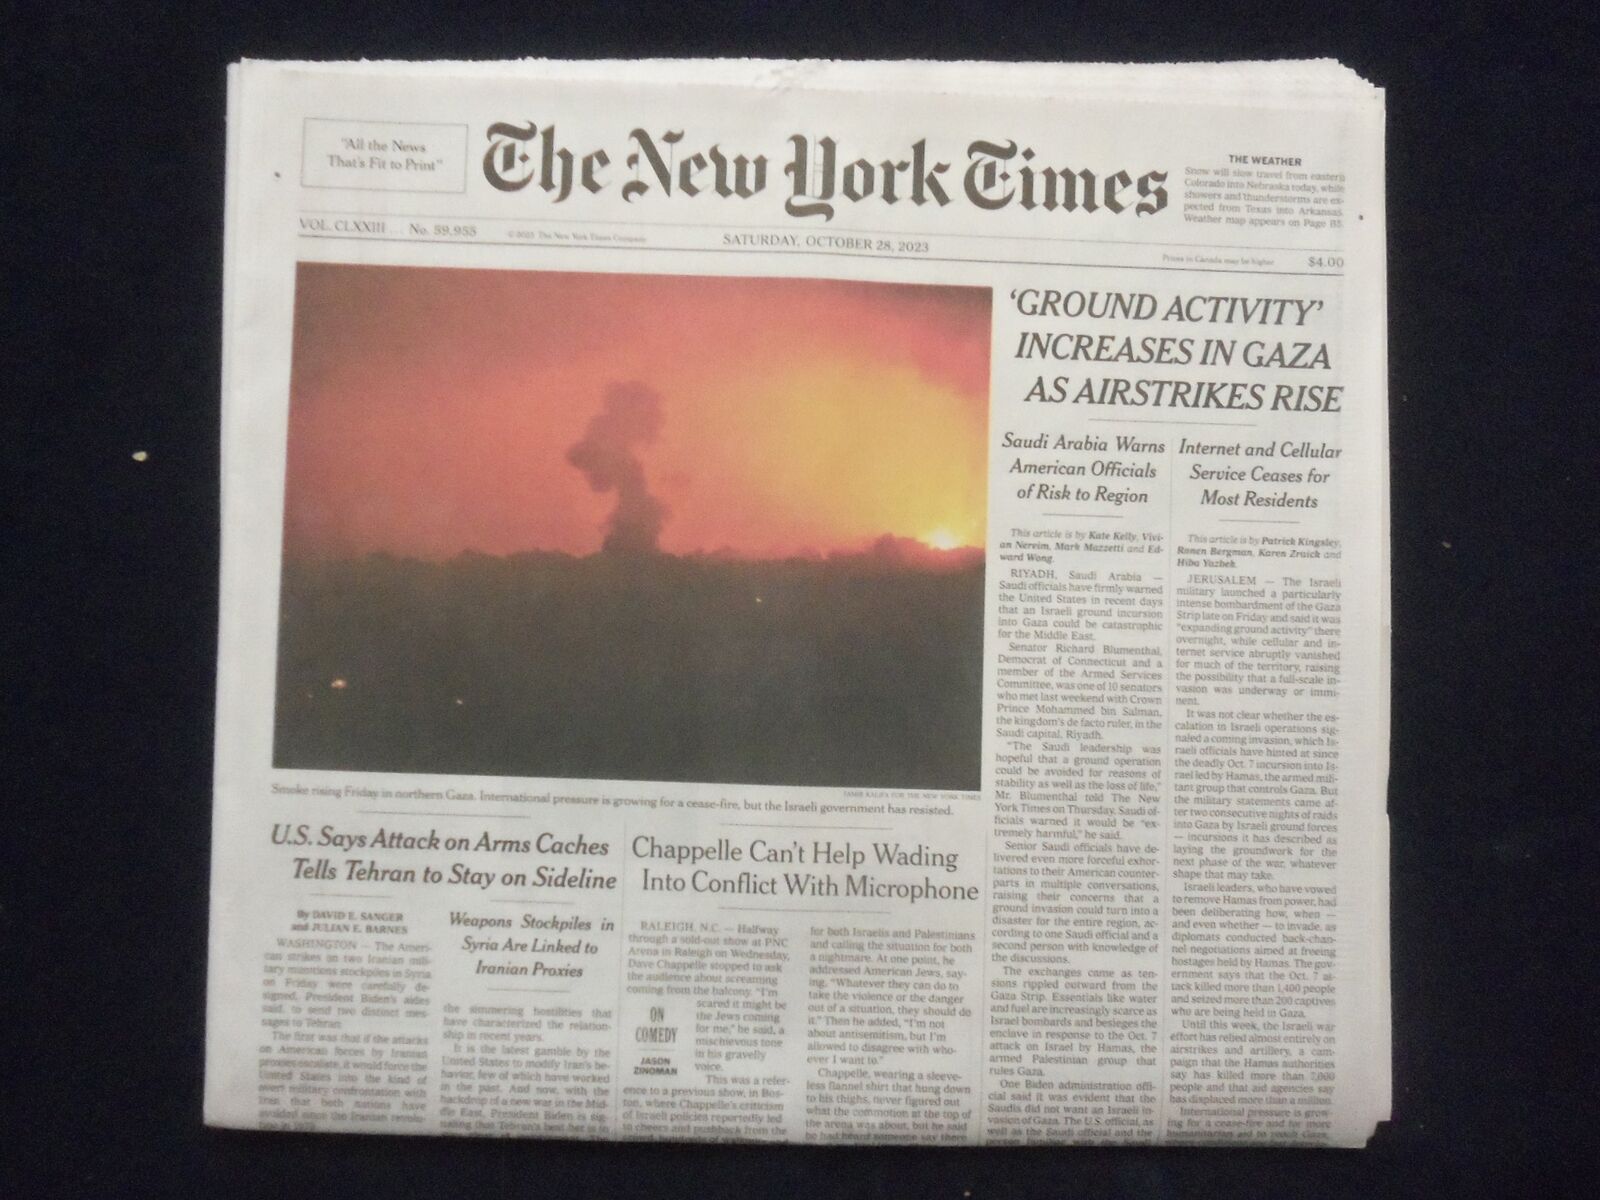 2023 OCTOBER 28 NEW YORK TIMES-GROUND ACTIVITY INCREASES IN GAZA AIRSTIRKES RISE